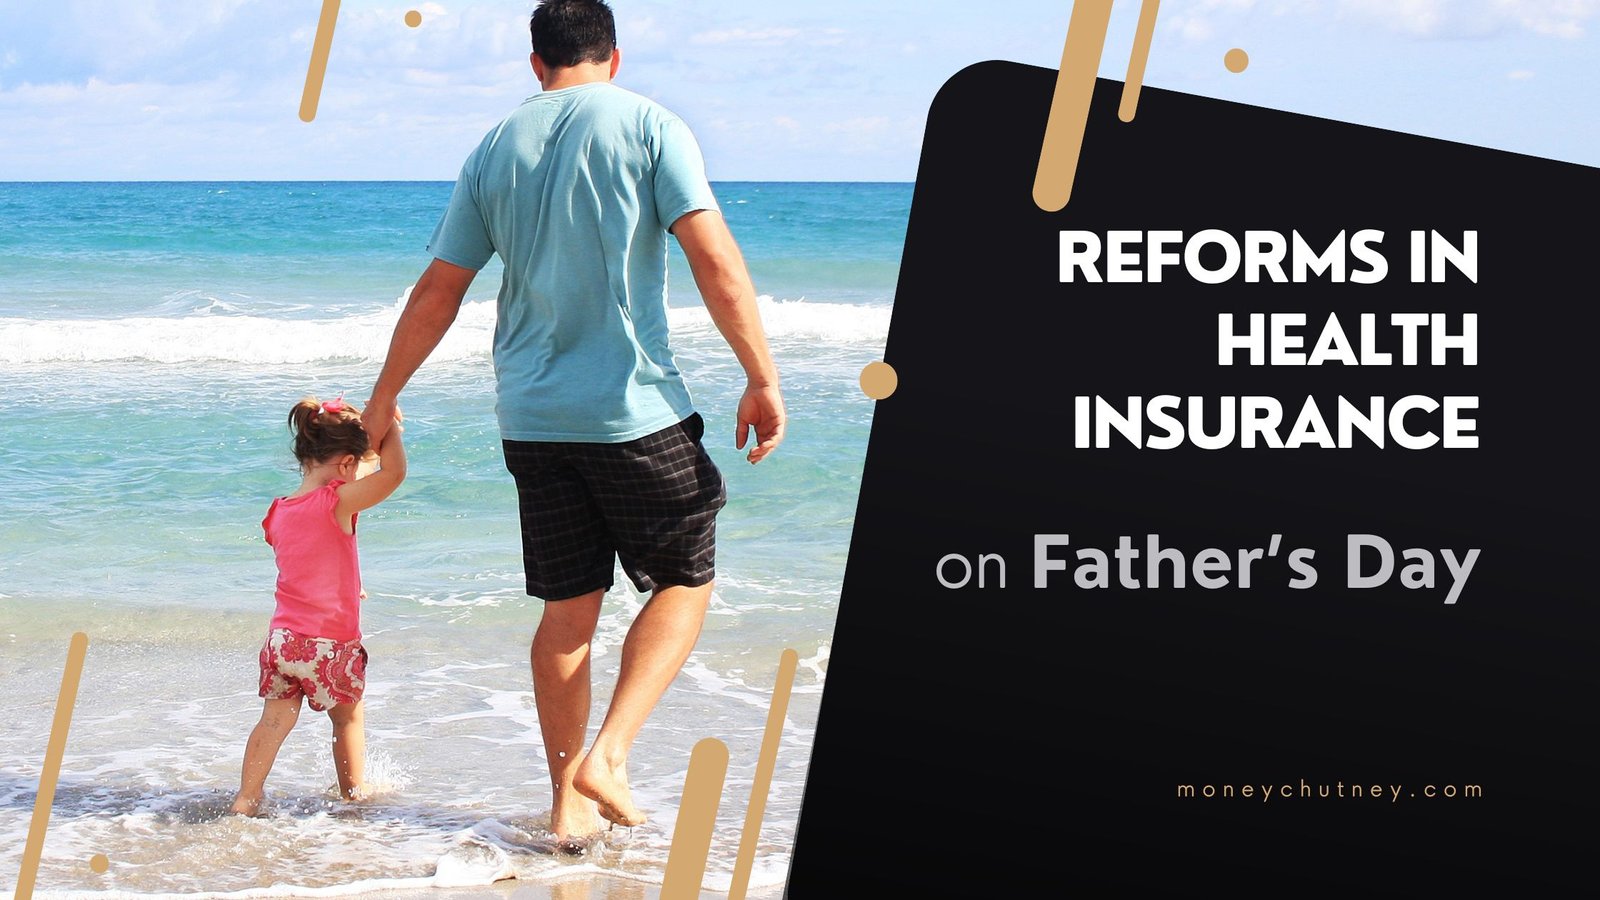 Father’s Day Health Insurance Bonanza: No Age Limits, Faster Approvals, and More Exciting Reforms